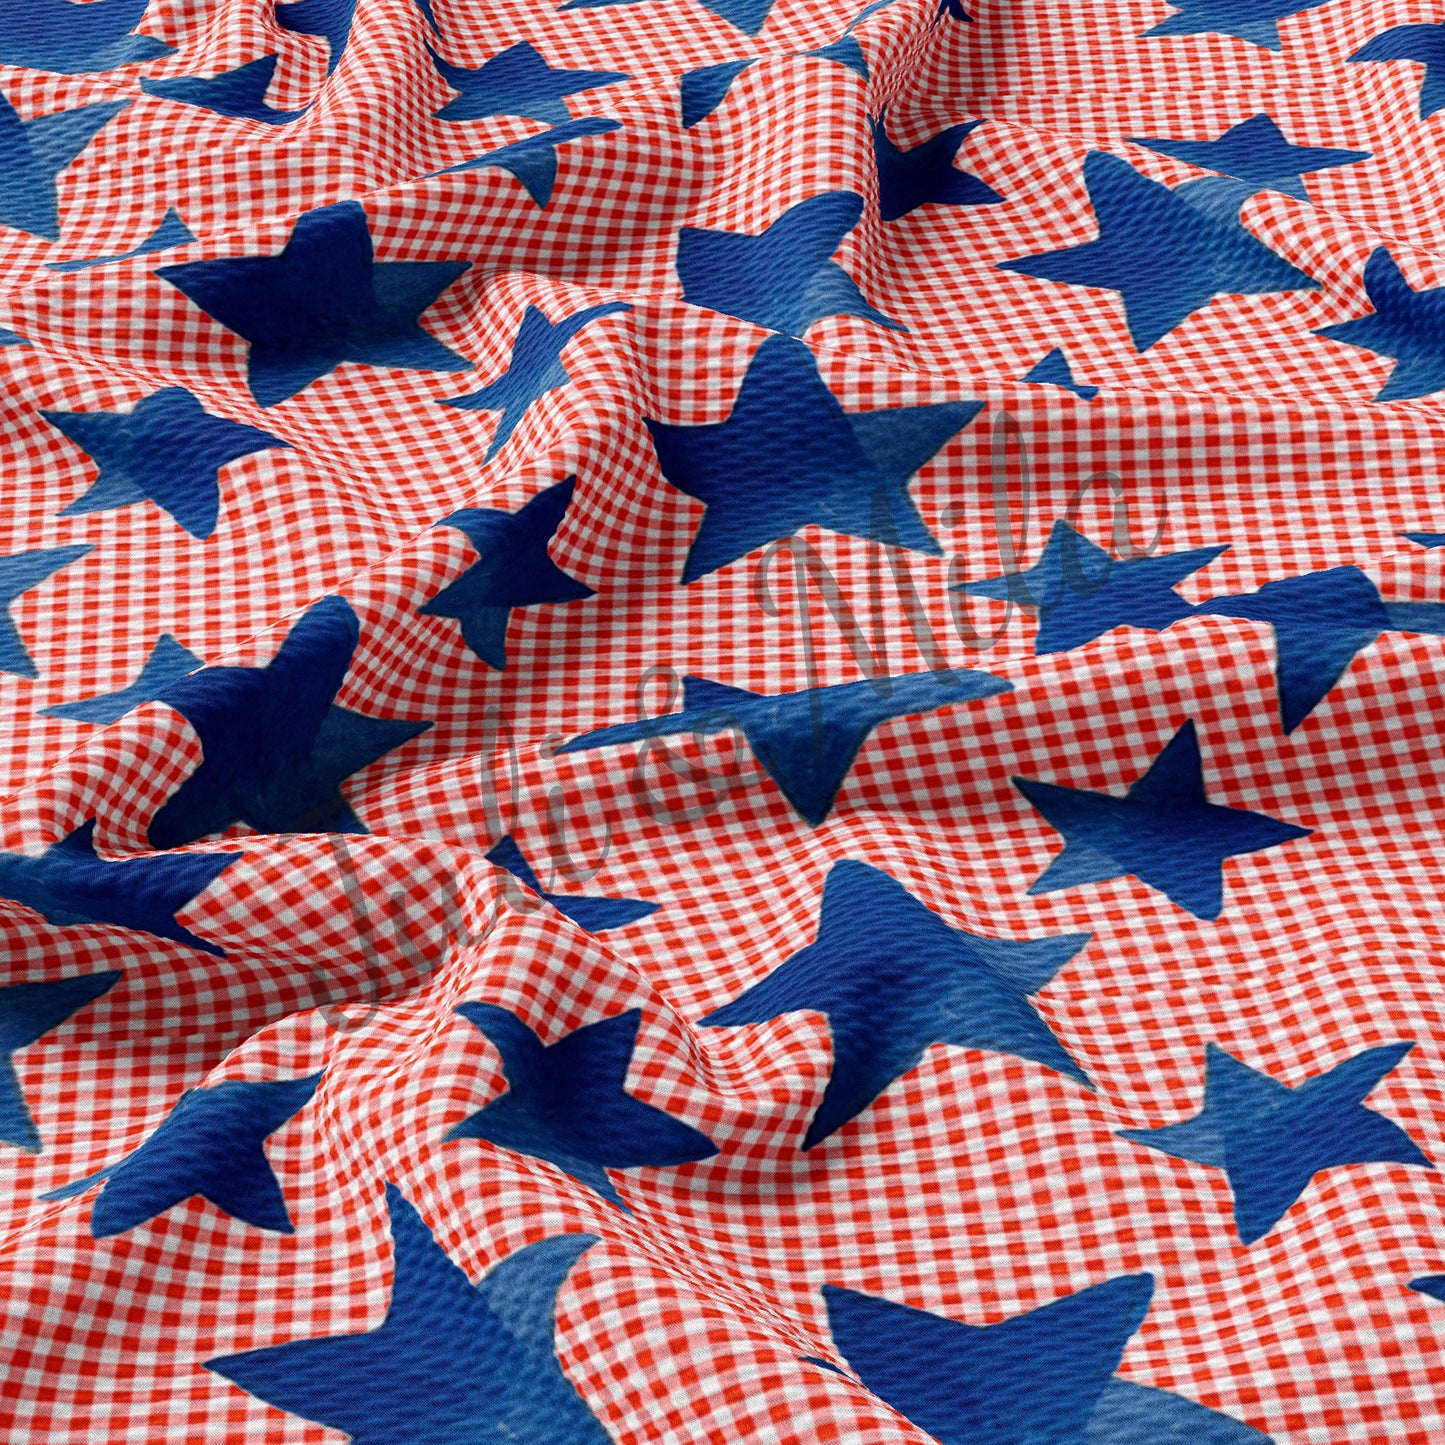 Patriotic 4th of July Bullet Fabric USA Flag PT9